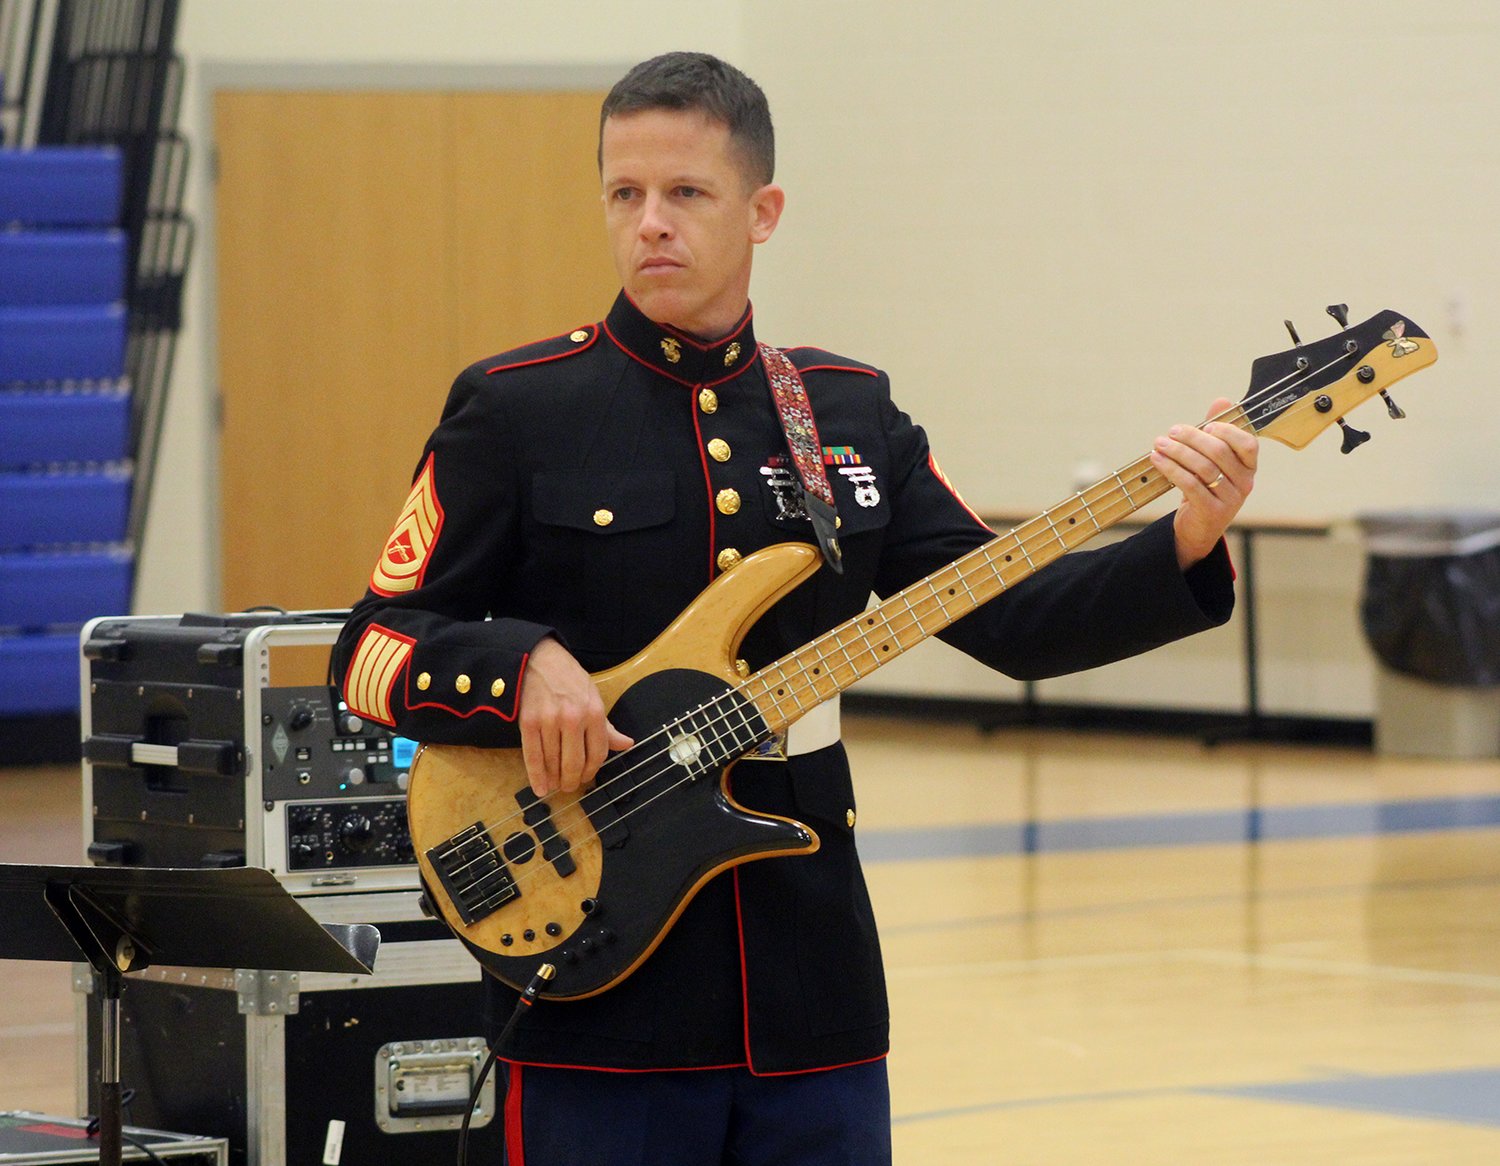 Gunnery Sgt. Will Pierce is the bass guitarist for the group. His passion and flare were on full display to the delight of the crowd during the performance.